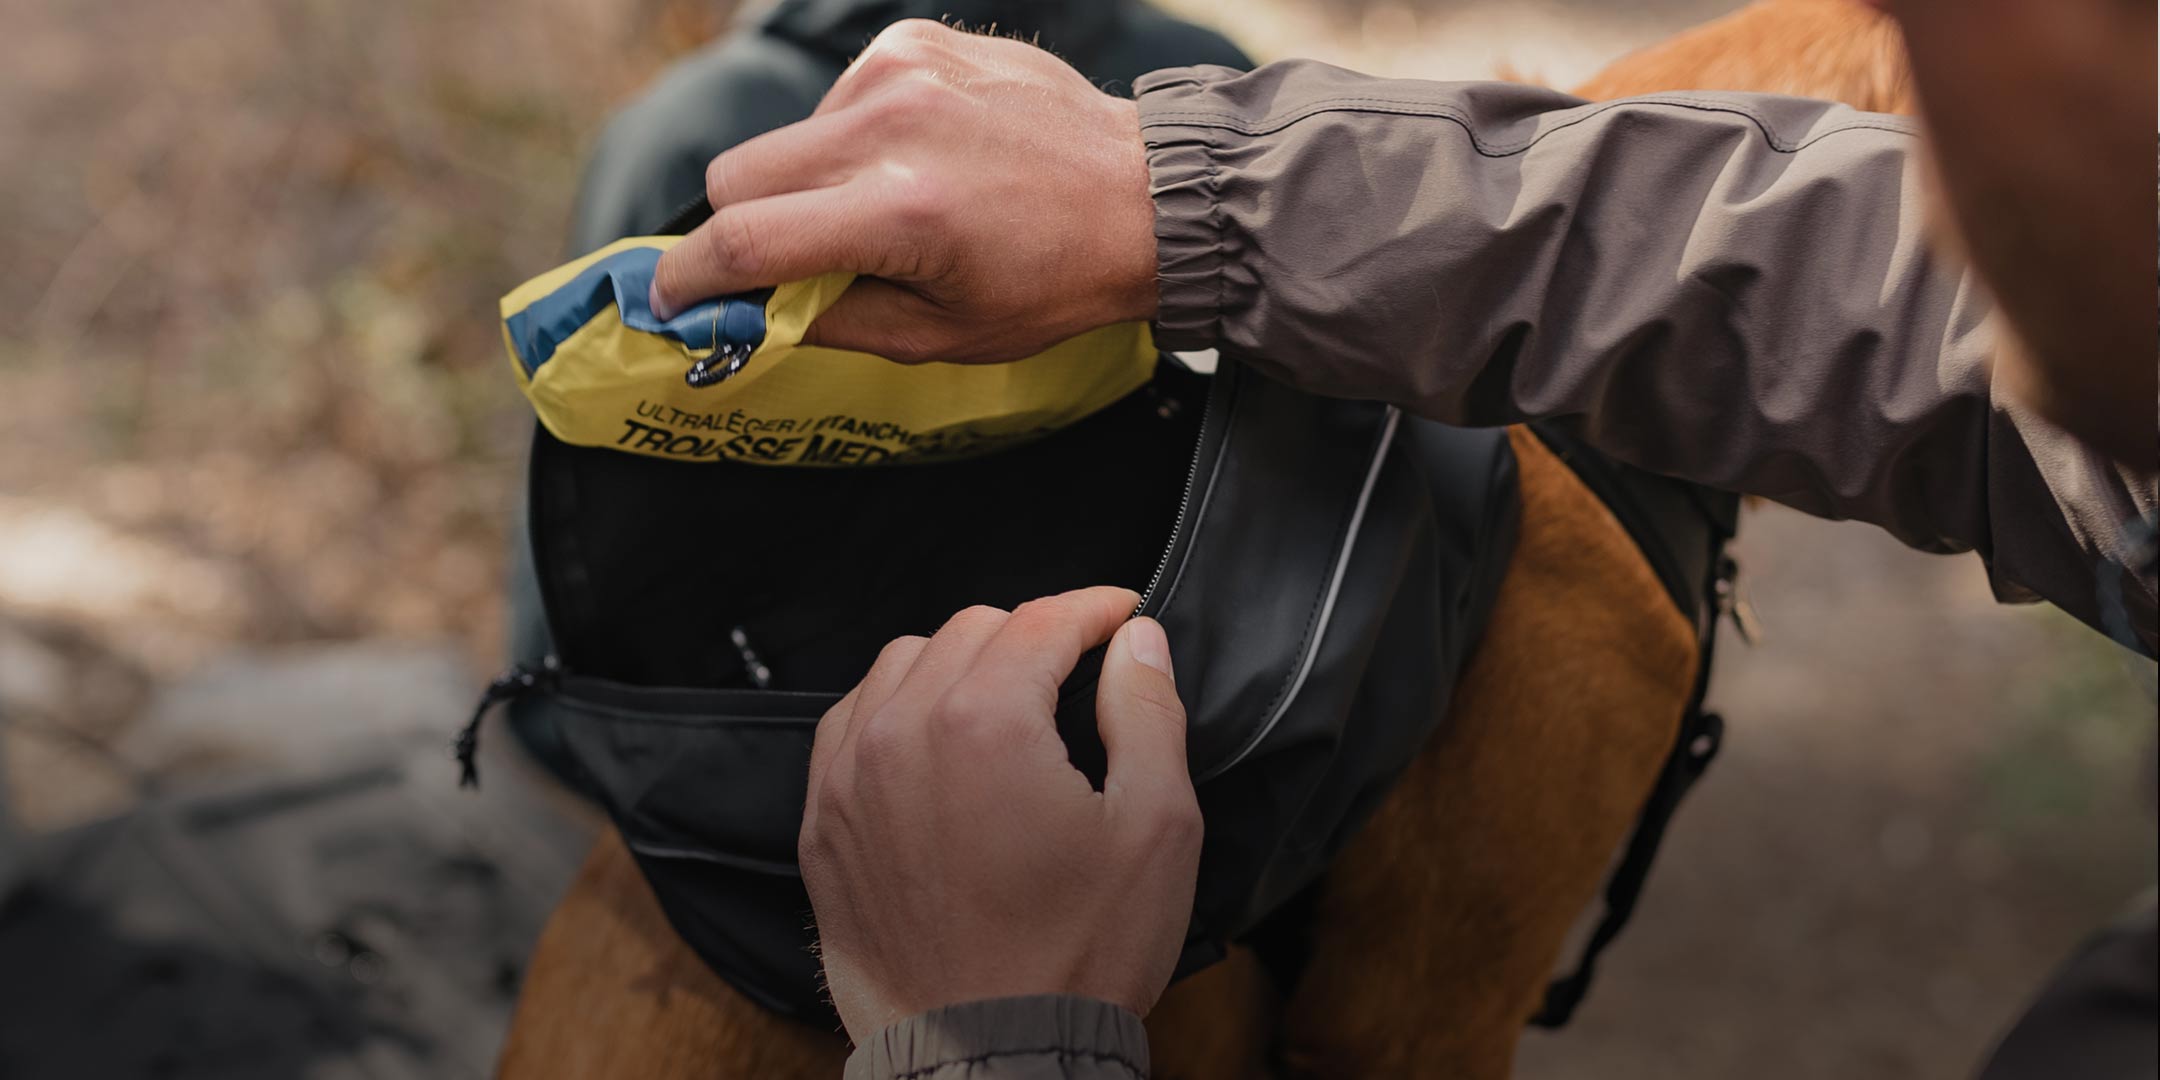 man loading his Ascension dog pack prior to going on a hike